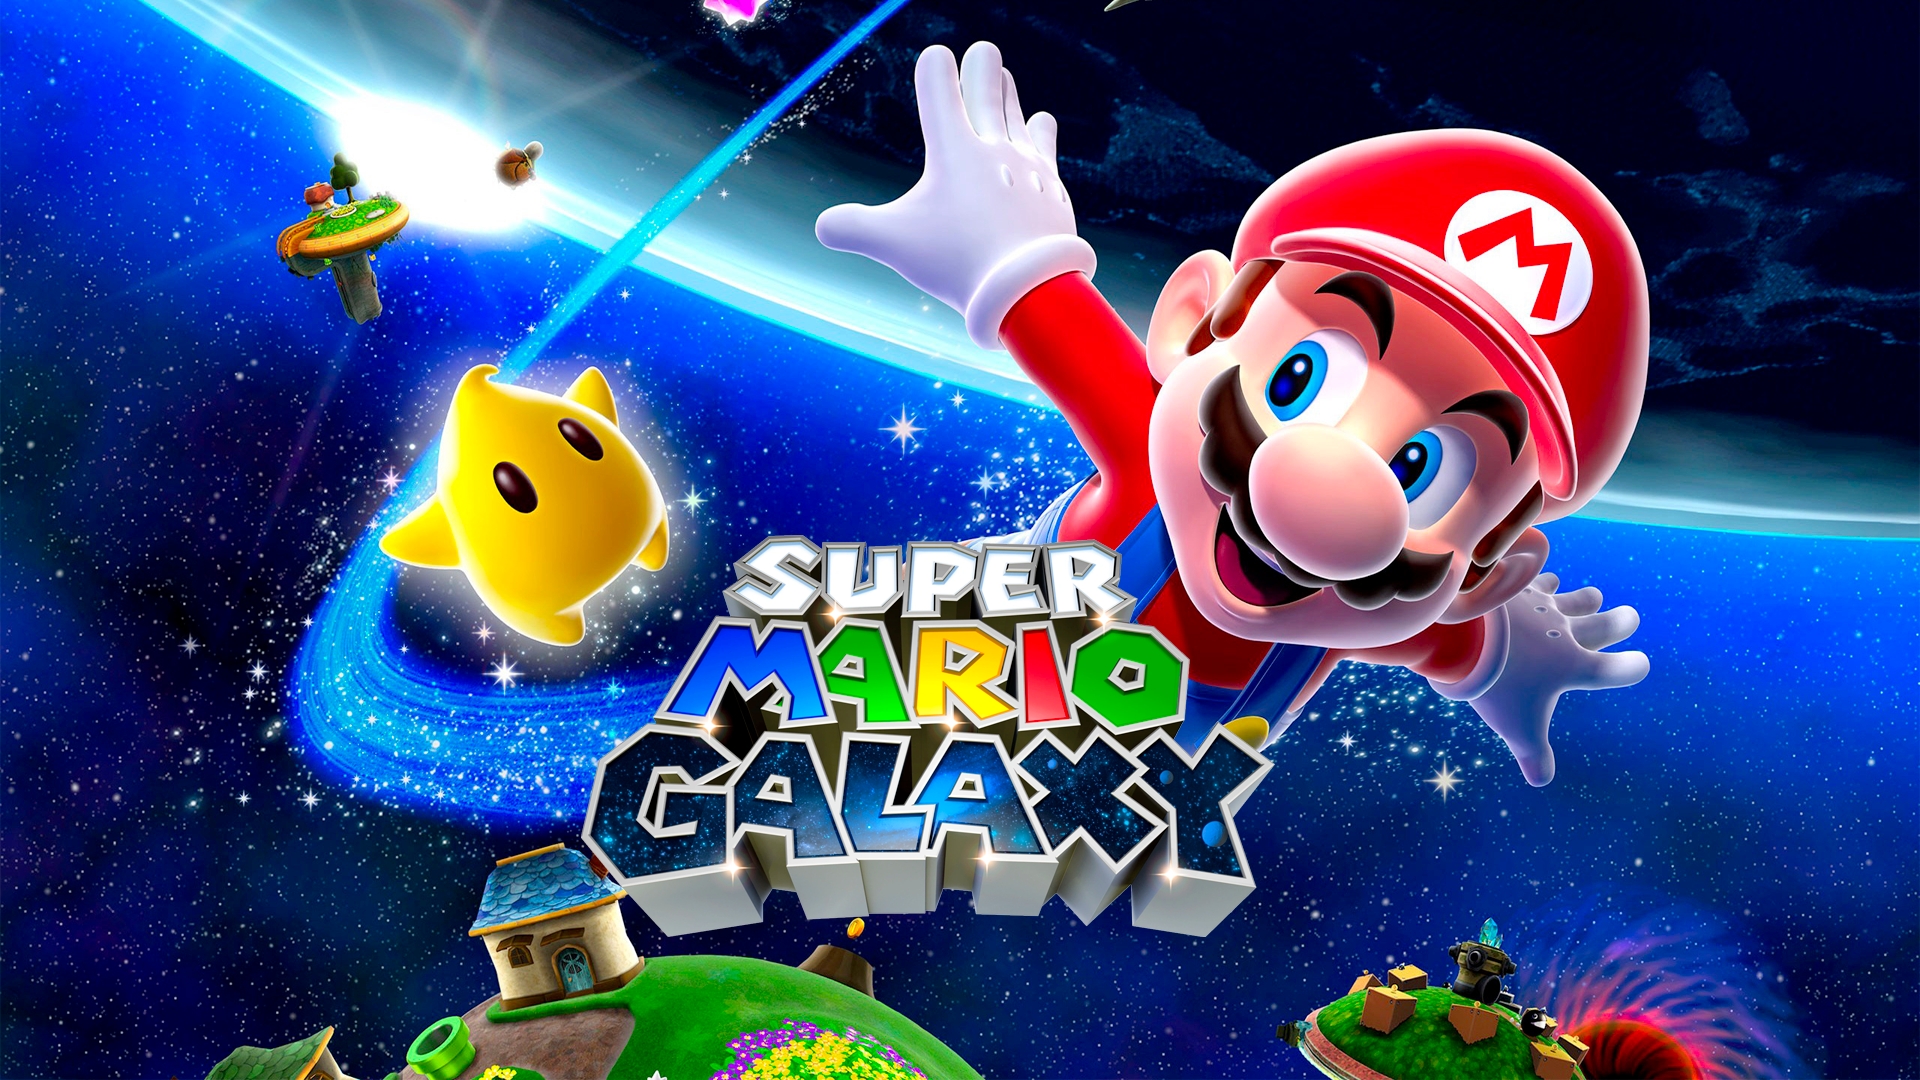 super-mario-galaxy-switch-remastered-edition-switch-game-nintendo-eshop-europe-cover.jpg